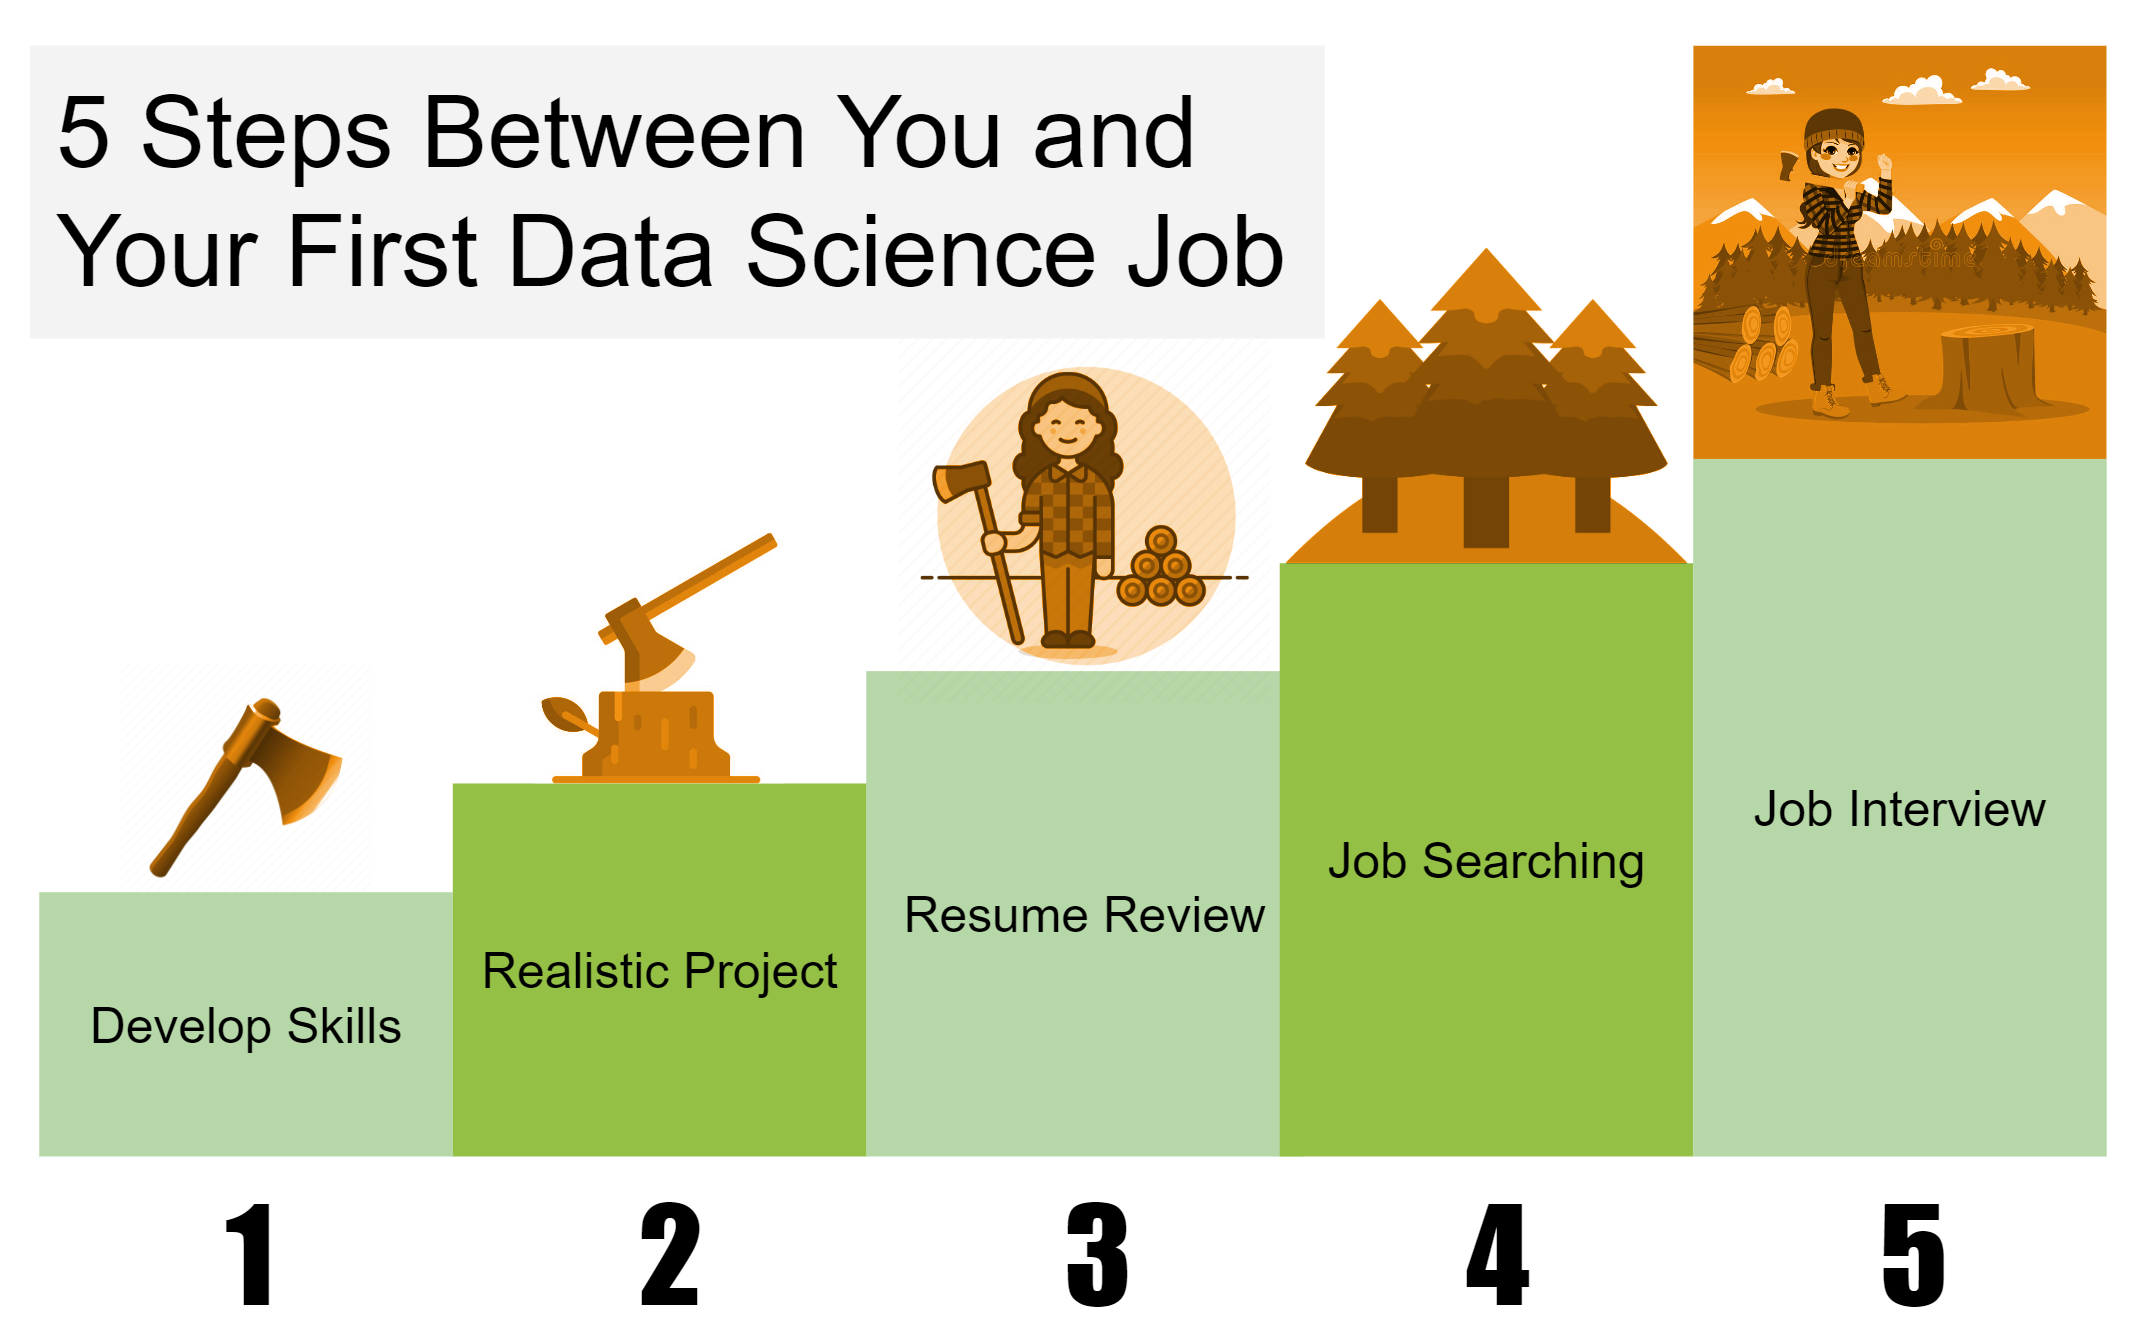 5 steps between you and your first data science job